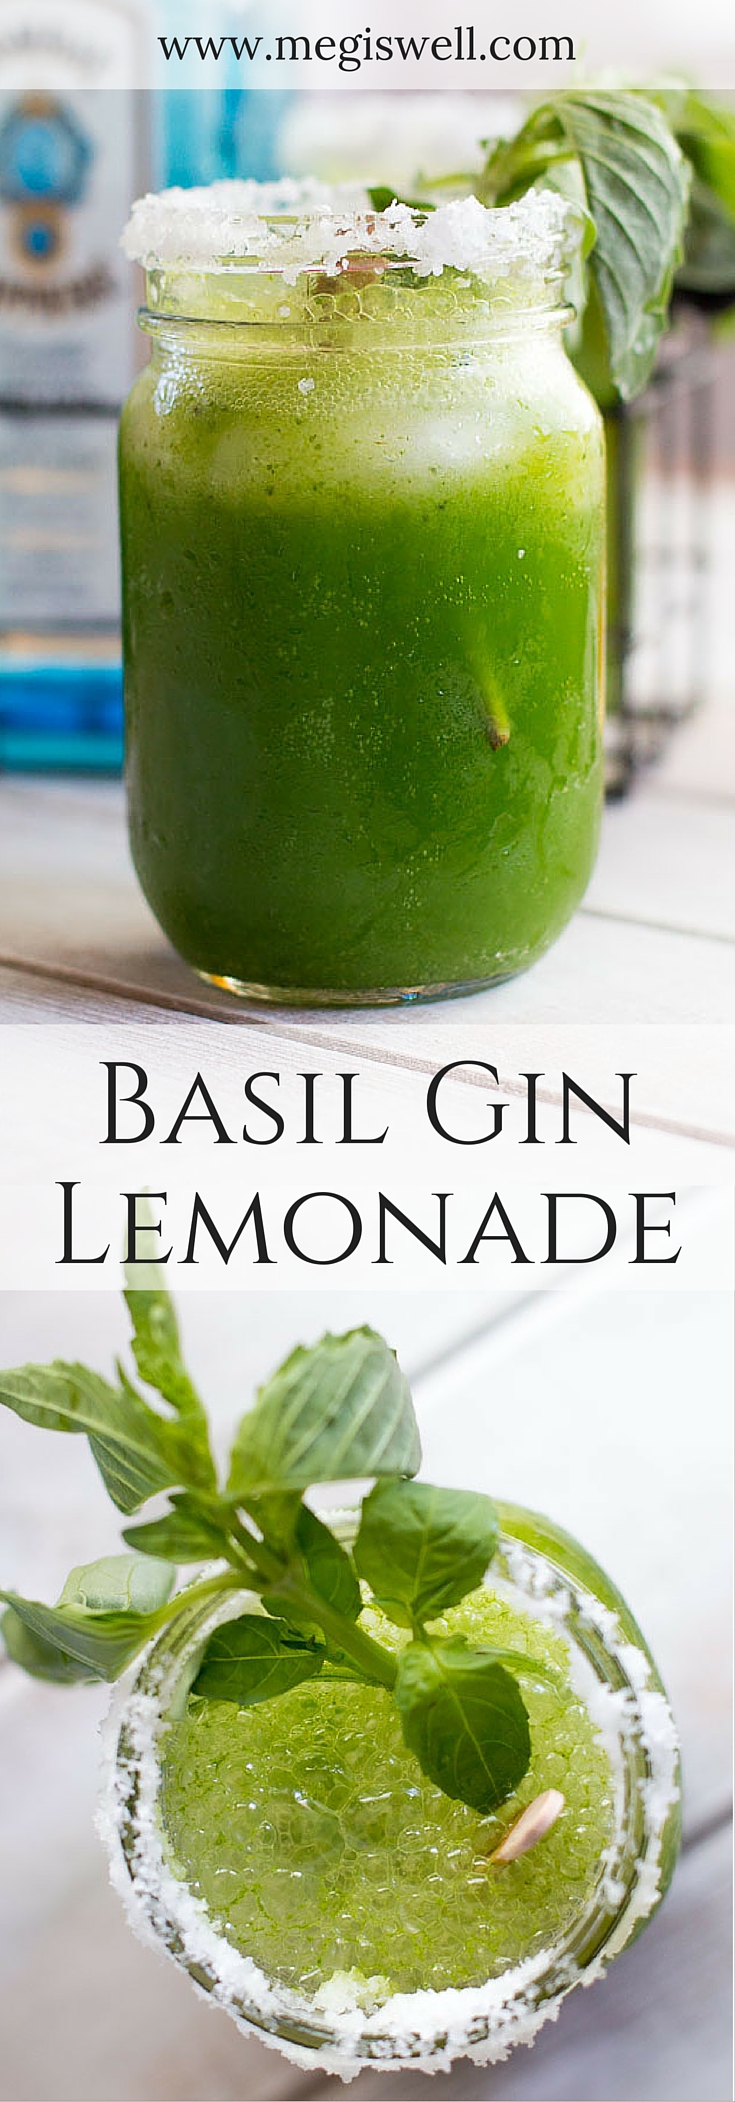 The basil, lemons, and gin in this Basil-Gin Lemonade create a refreshing, brisk, and cool beverage that is perfect for hot days. | www.megiswell.com